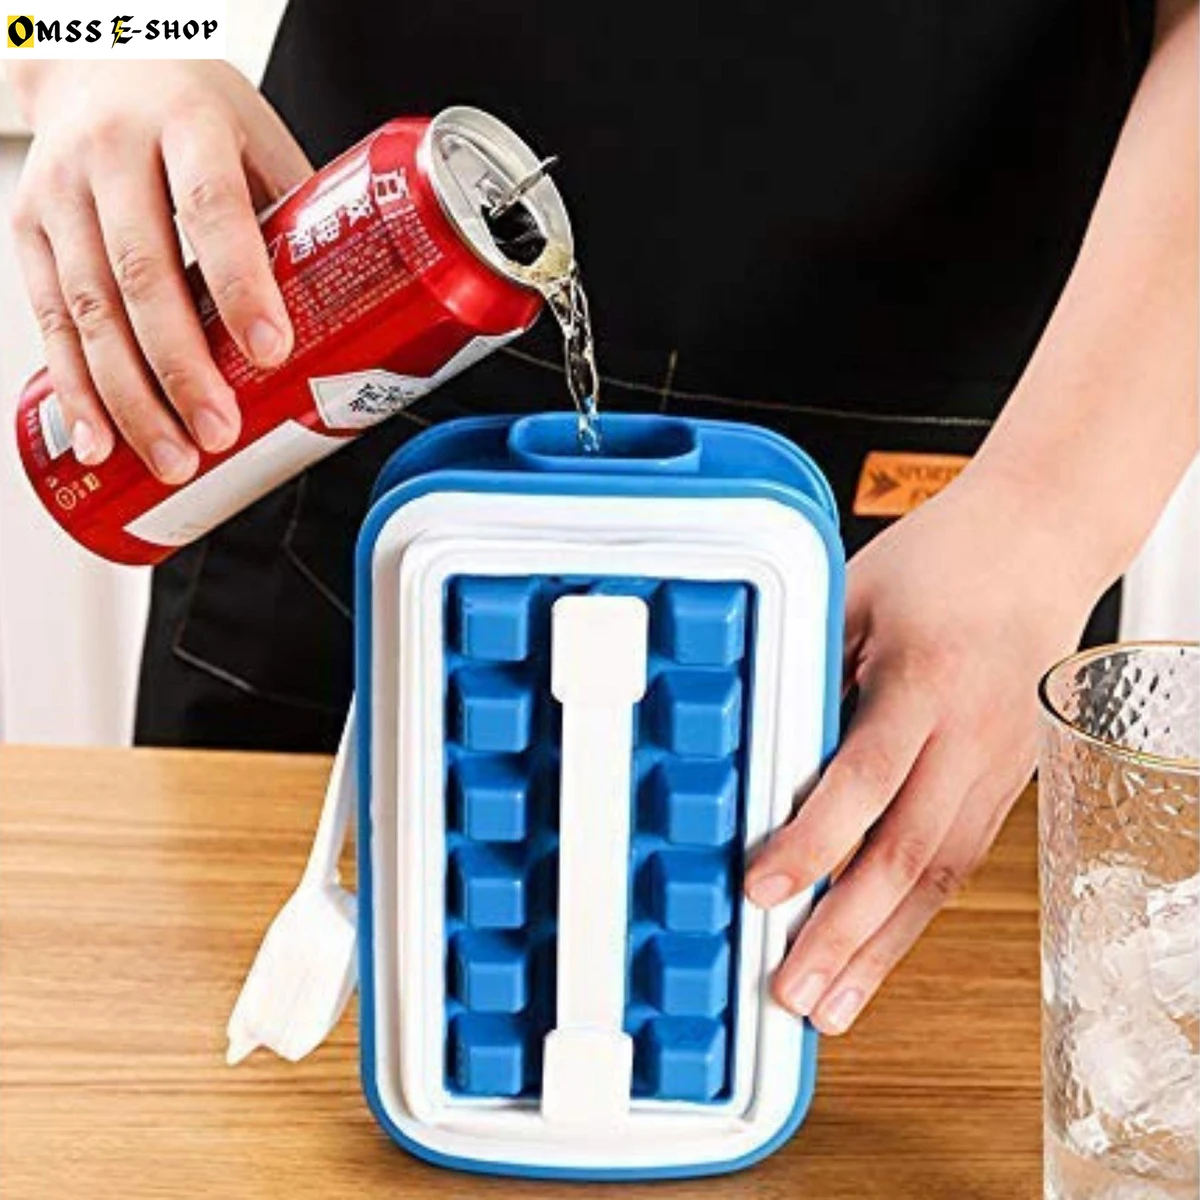 Ice Trays 36 Cells Folding Curling Ice Tray Molds Bar Maker Bag, Silicone Ice Cube Trays with Lids, Iced Drink Water Bottle Quick-Freezing Artifact Ice Kettle Kitchen Tools (Multi Color) RP-550DH-RE